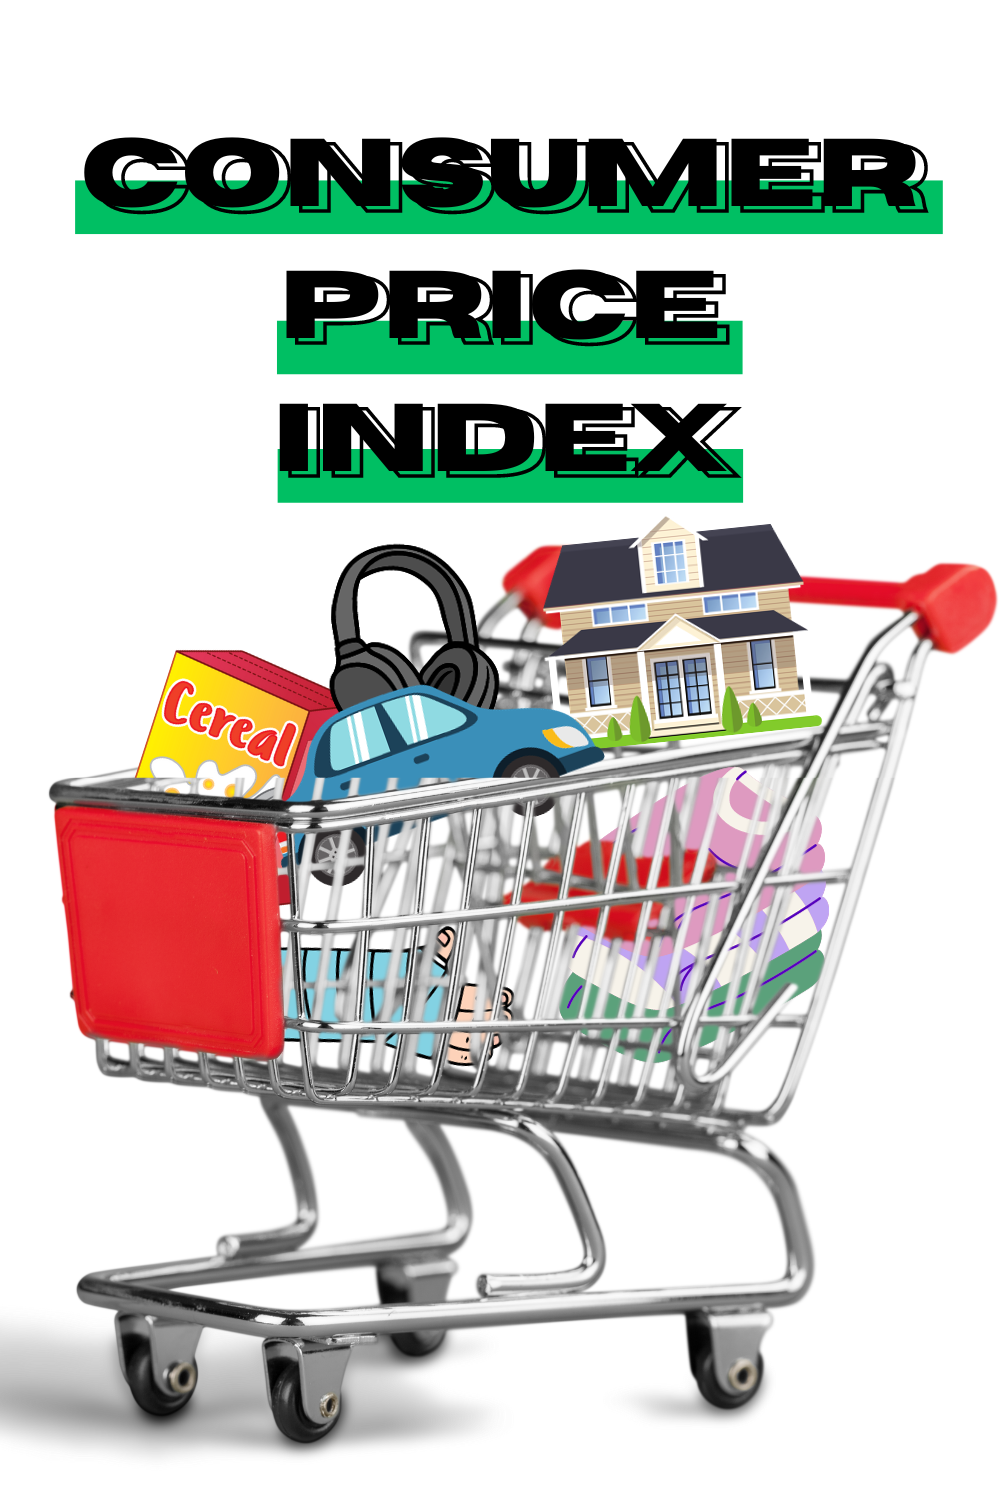 Image of shopping cart with various items used to show increasing inflation.